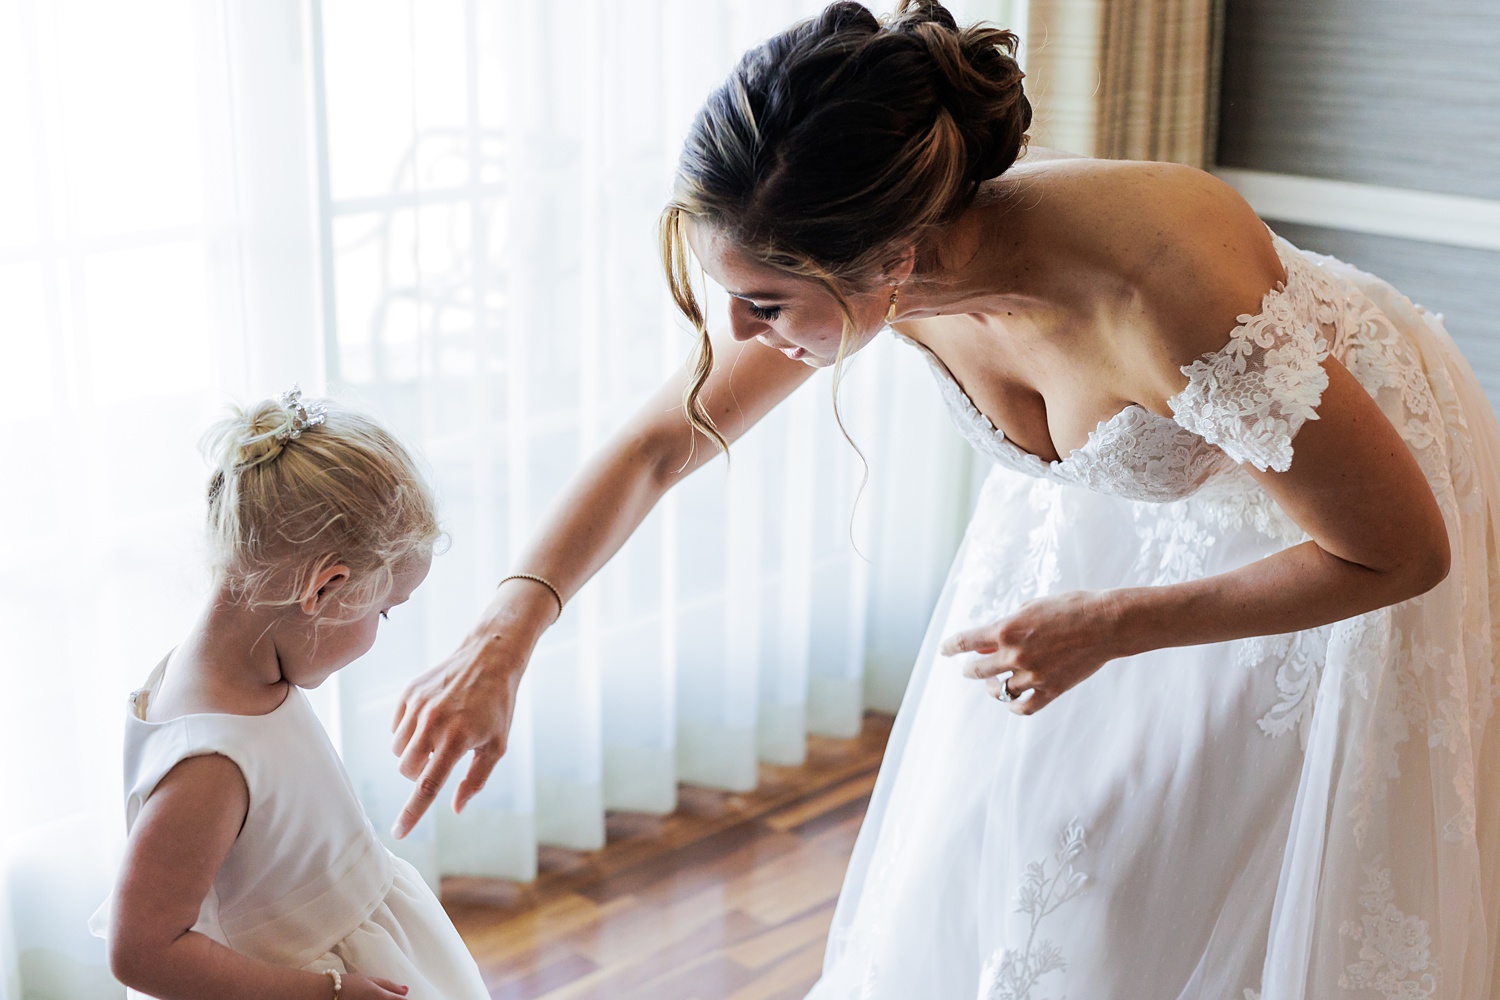 Bride and flower girl on the wedding day